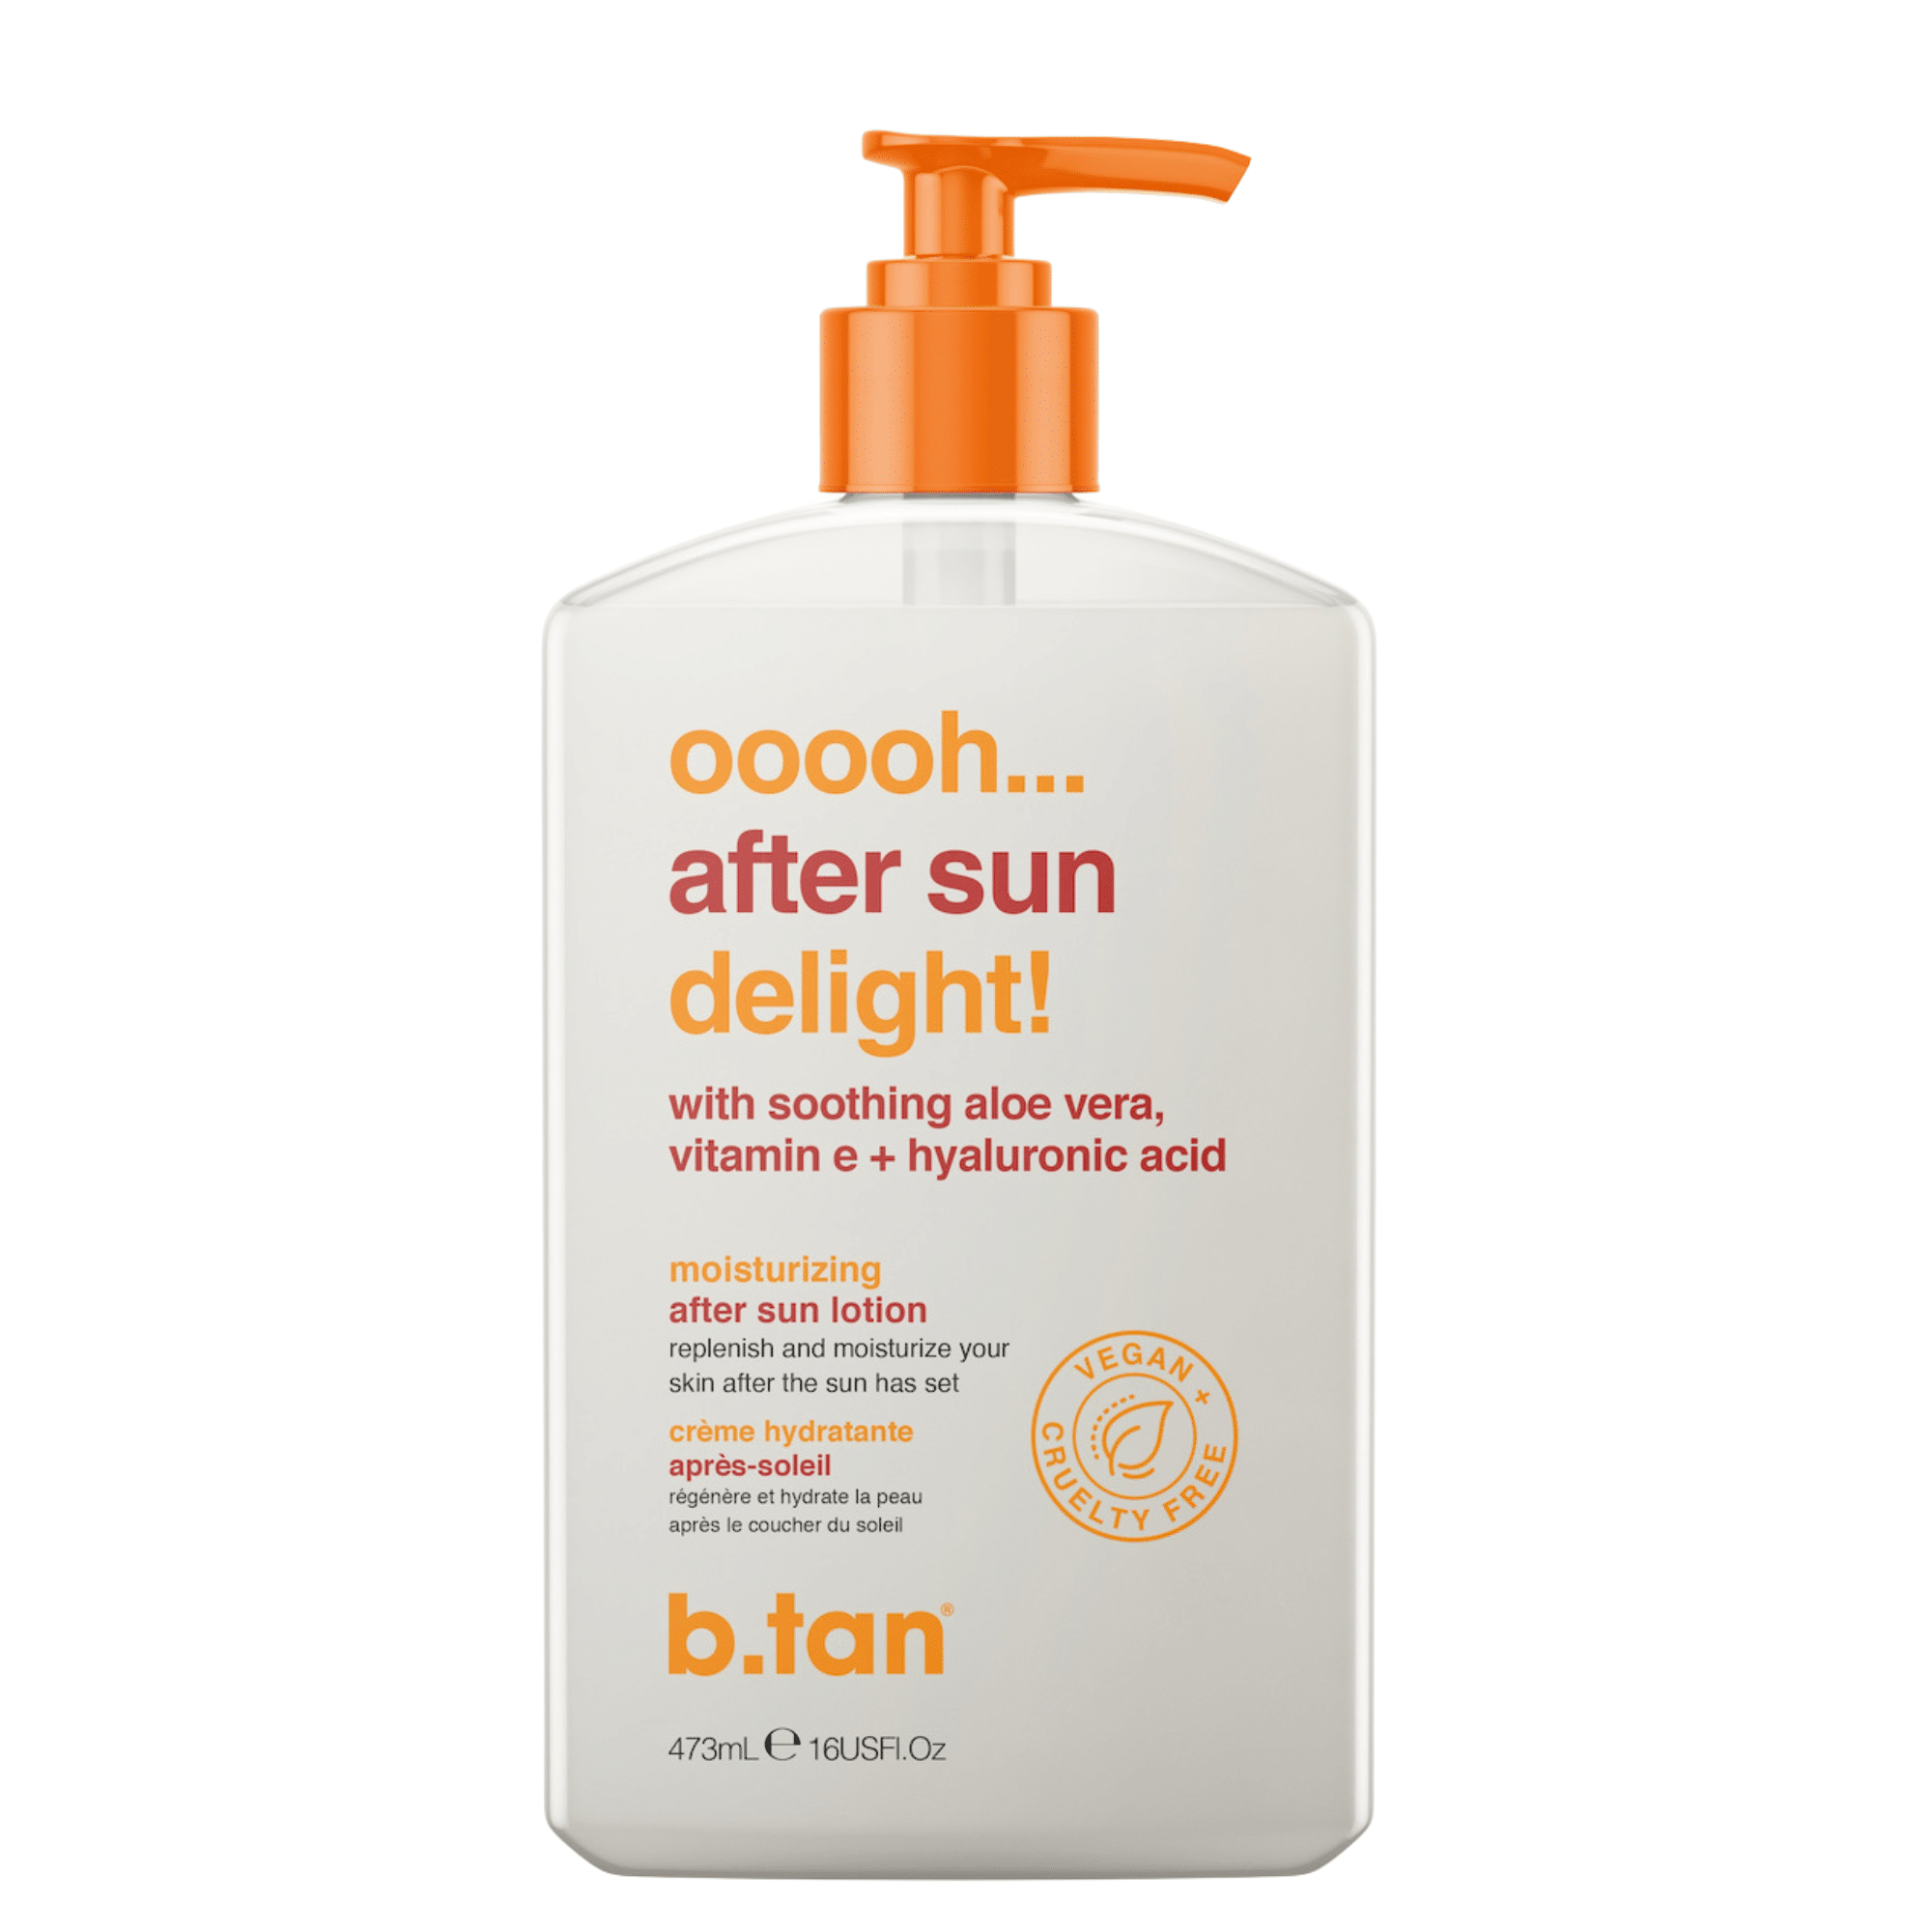 B.Tan Ooooh Aftersun Delight - Aftersun Lotion (437ml)